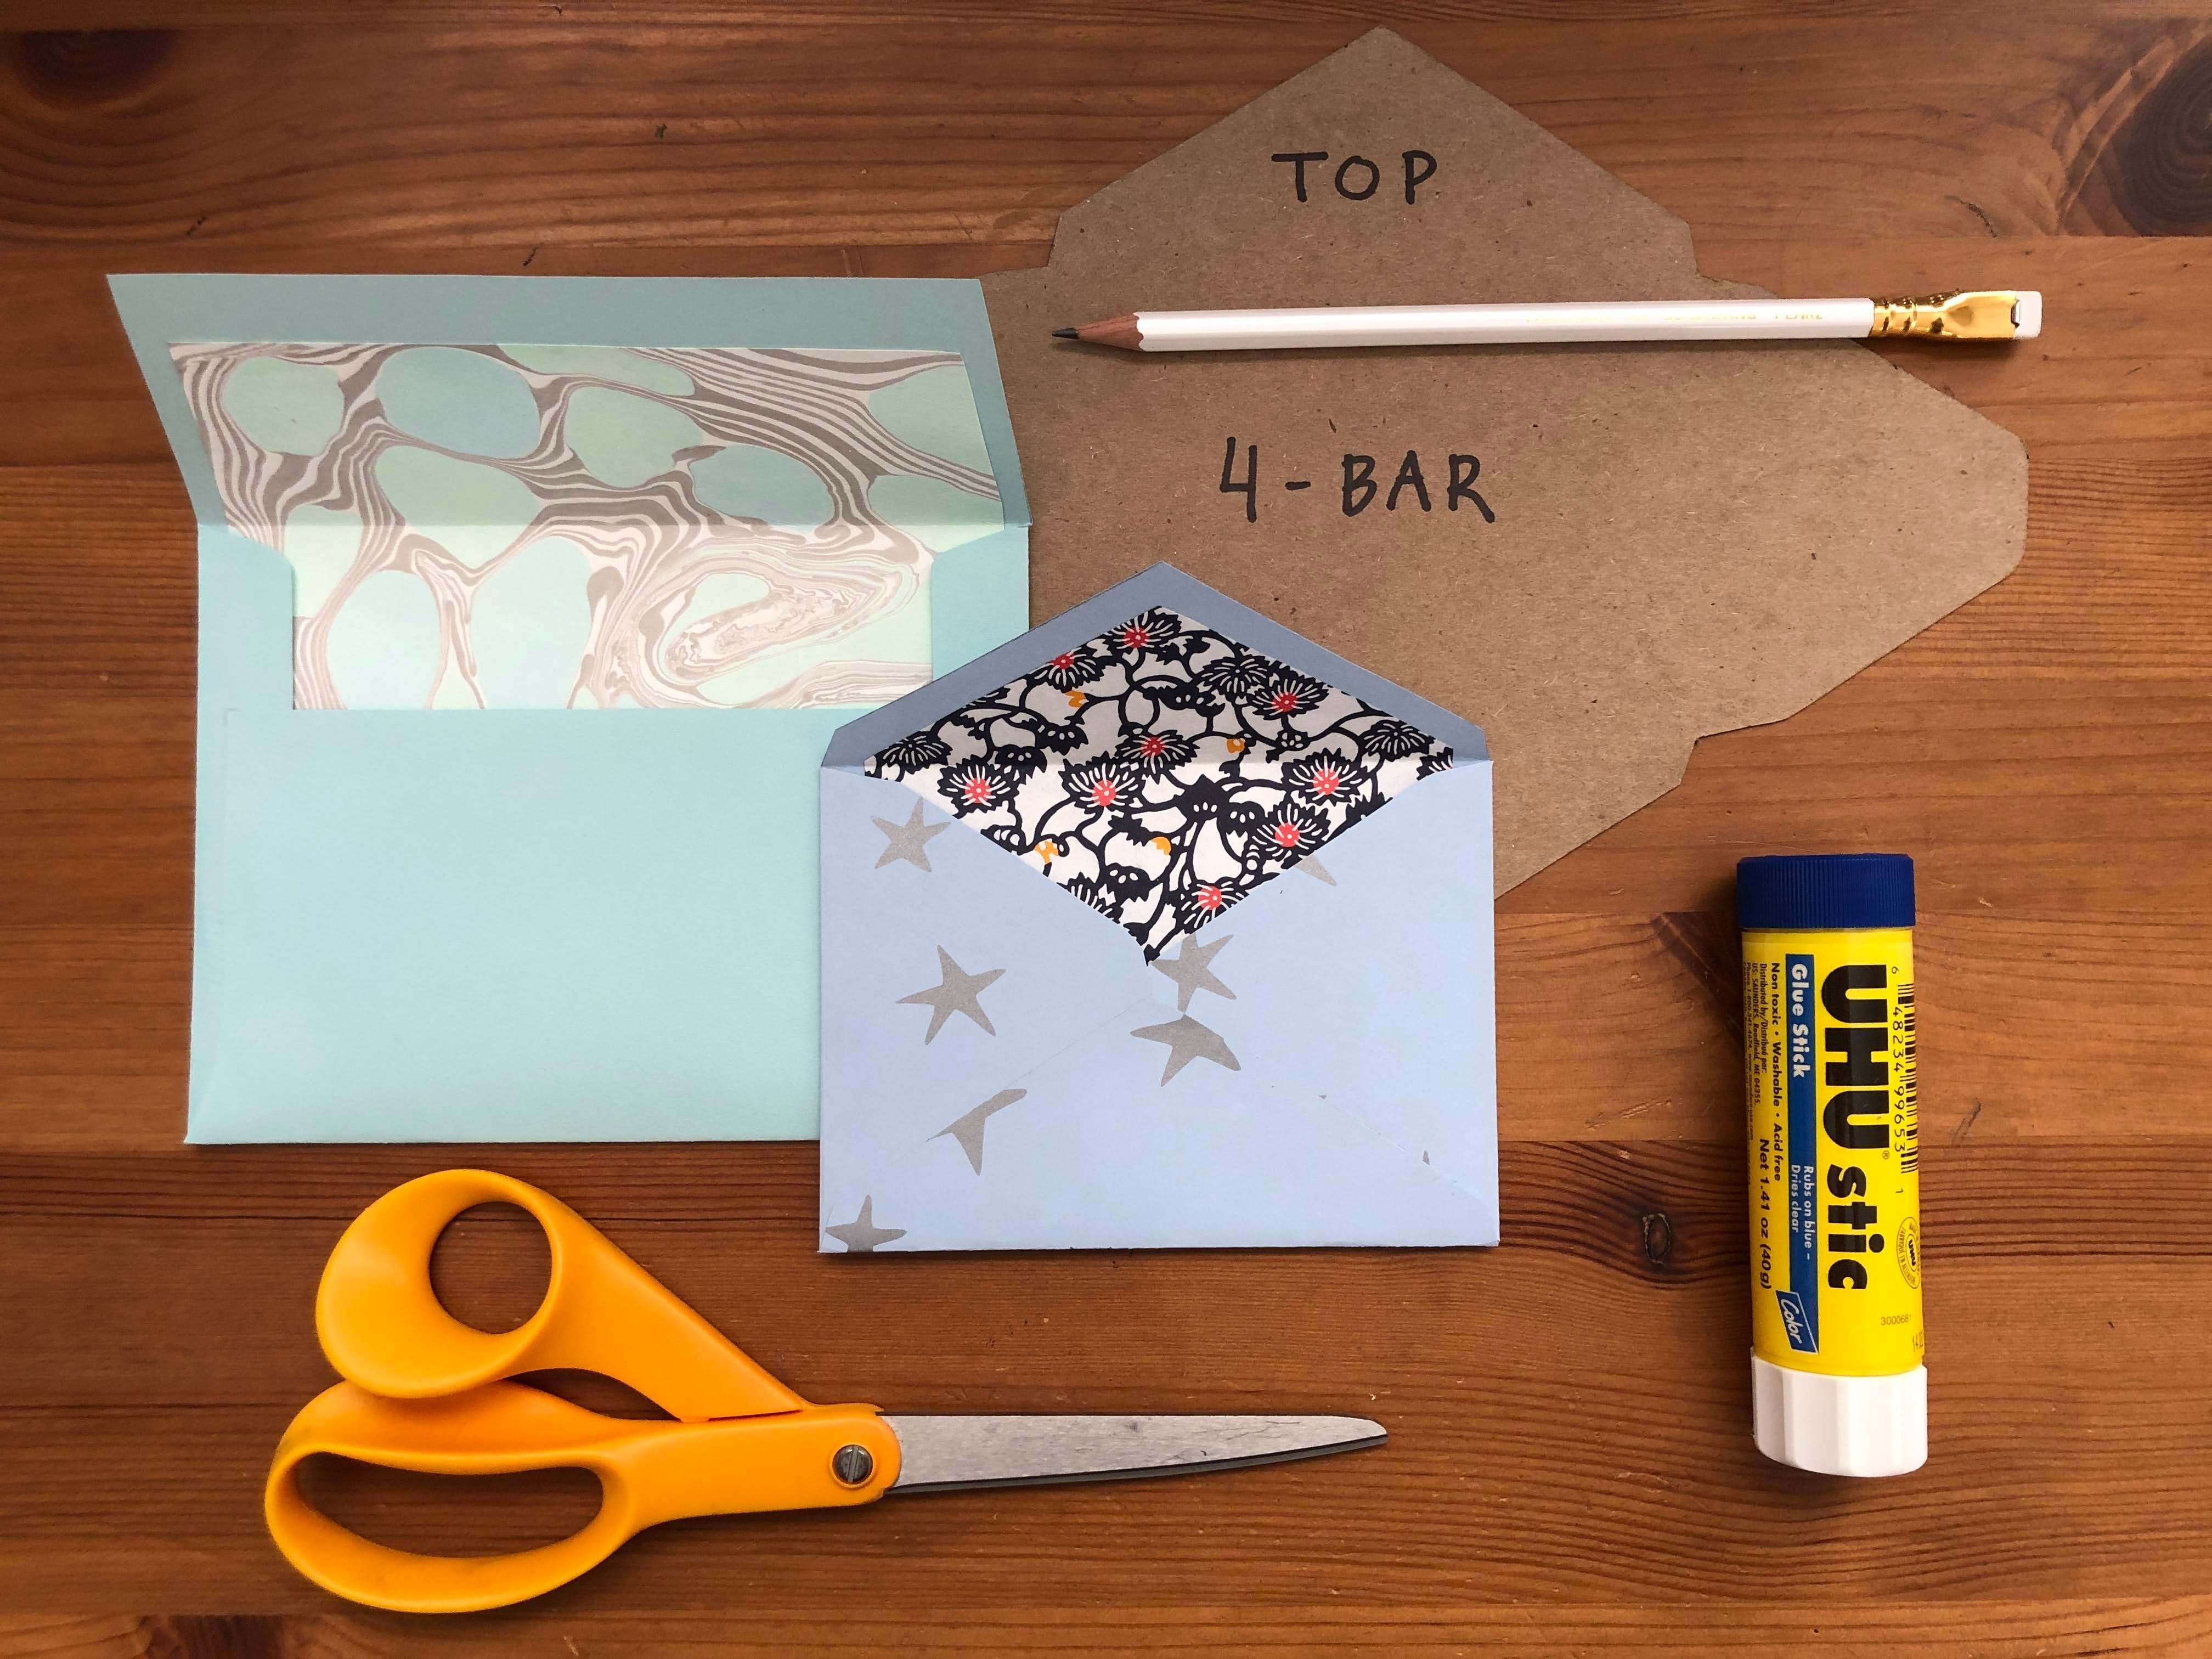 What's inside your envelopes? Make something with stamps, card stock,  envelopes and Love! - PaperPapers Blog